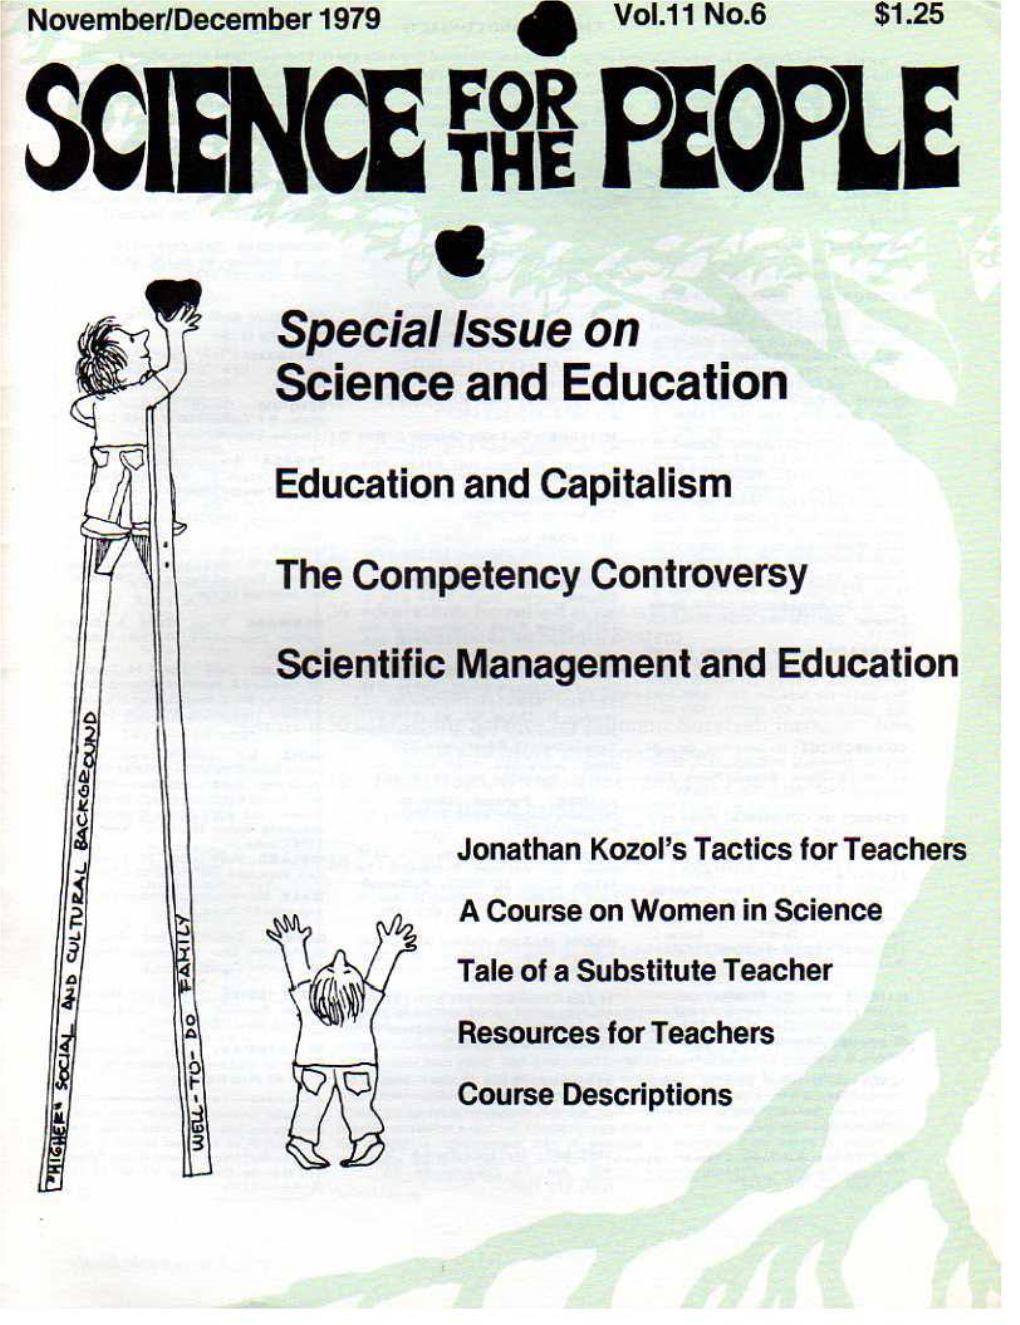 Science for the People Magazine Vol. 11, No. 6